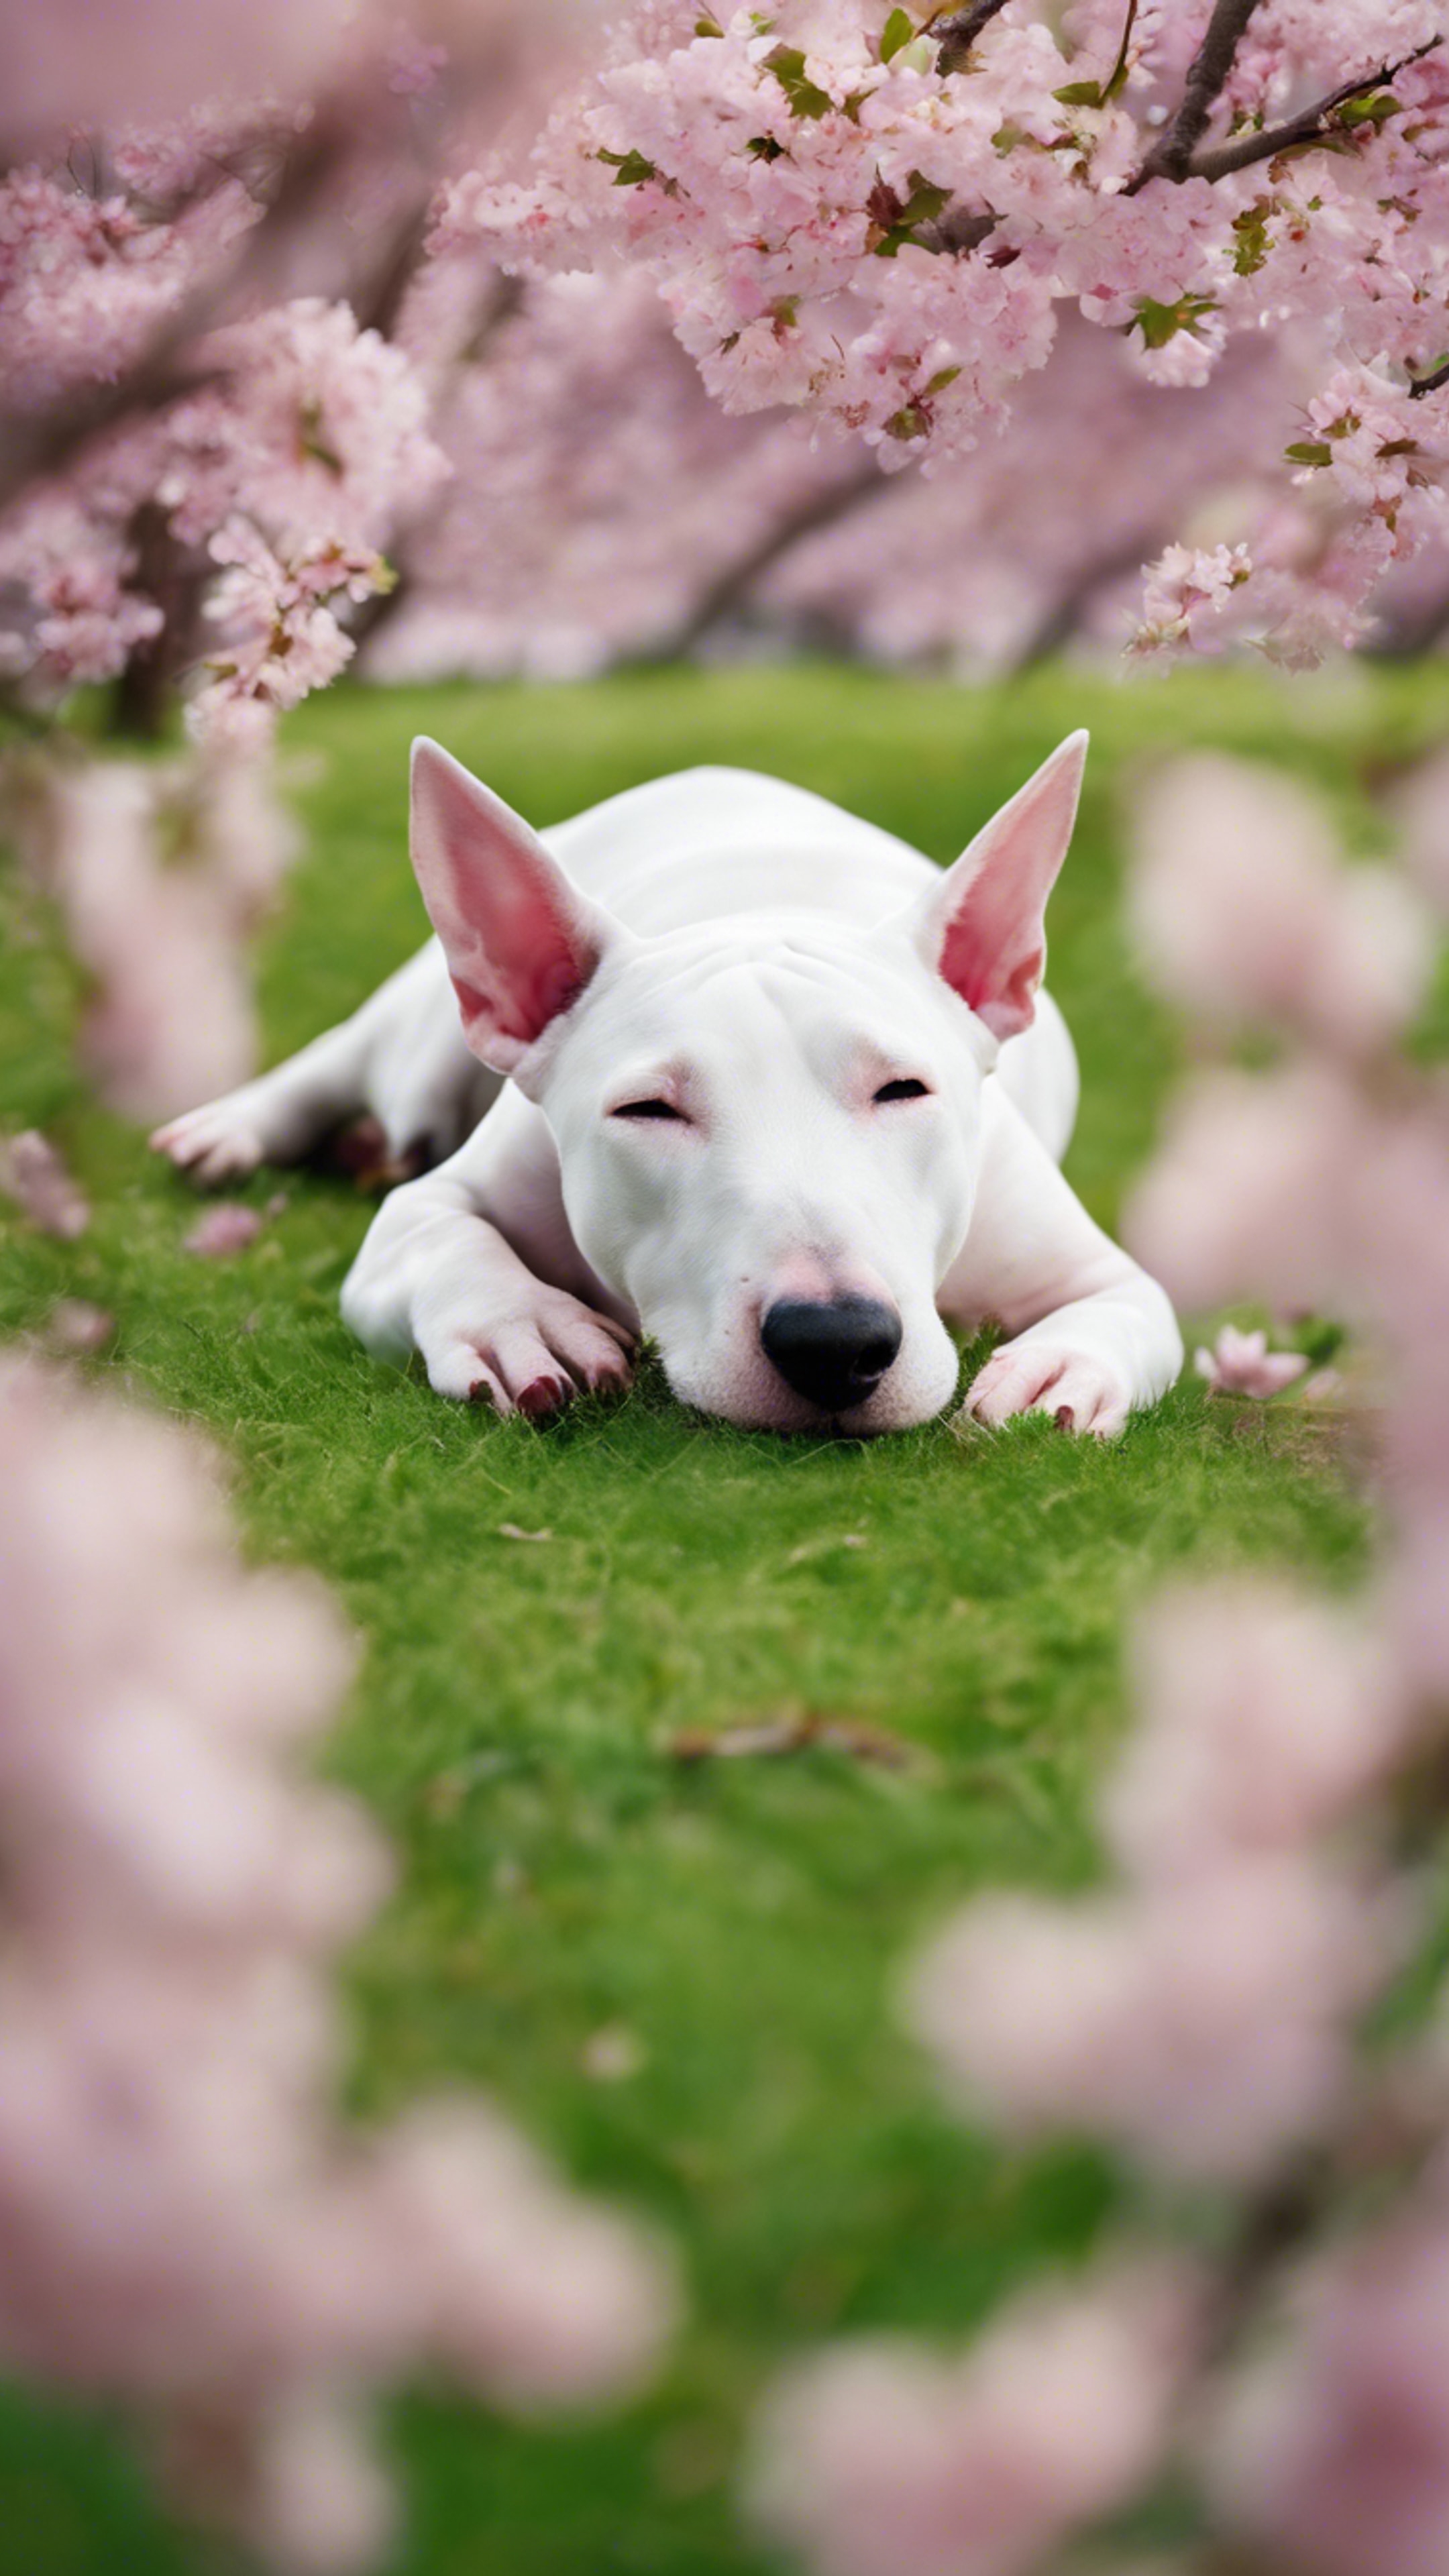 A Bull Terrier curled into a ball, sleeping in a bright green city park at the base of a cherry blossom tree. Hintergrund[3df408a3b3f7480298db]